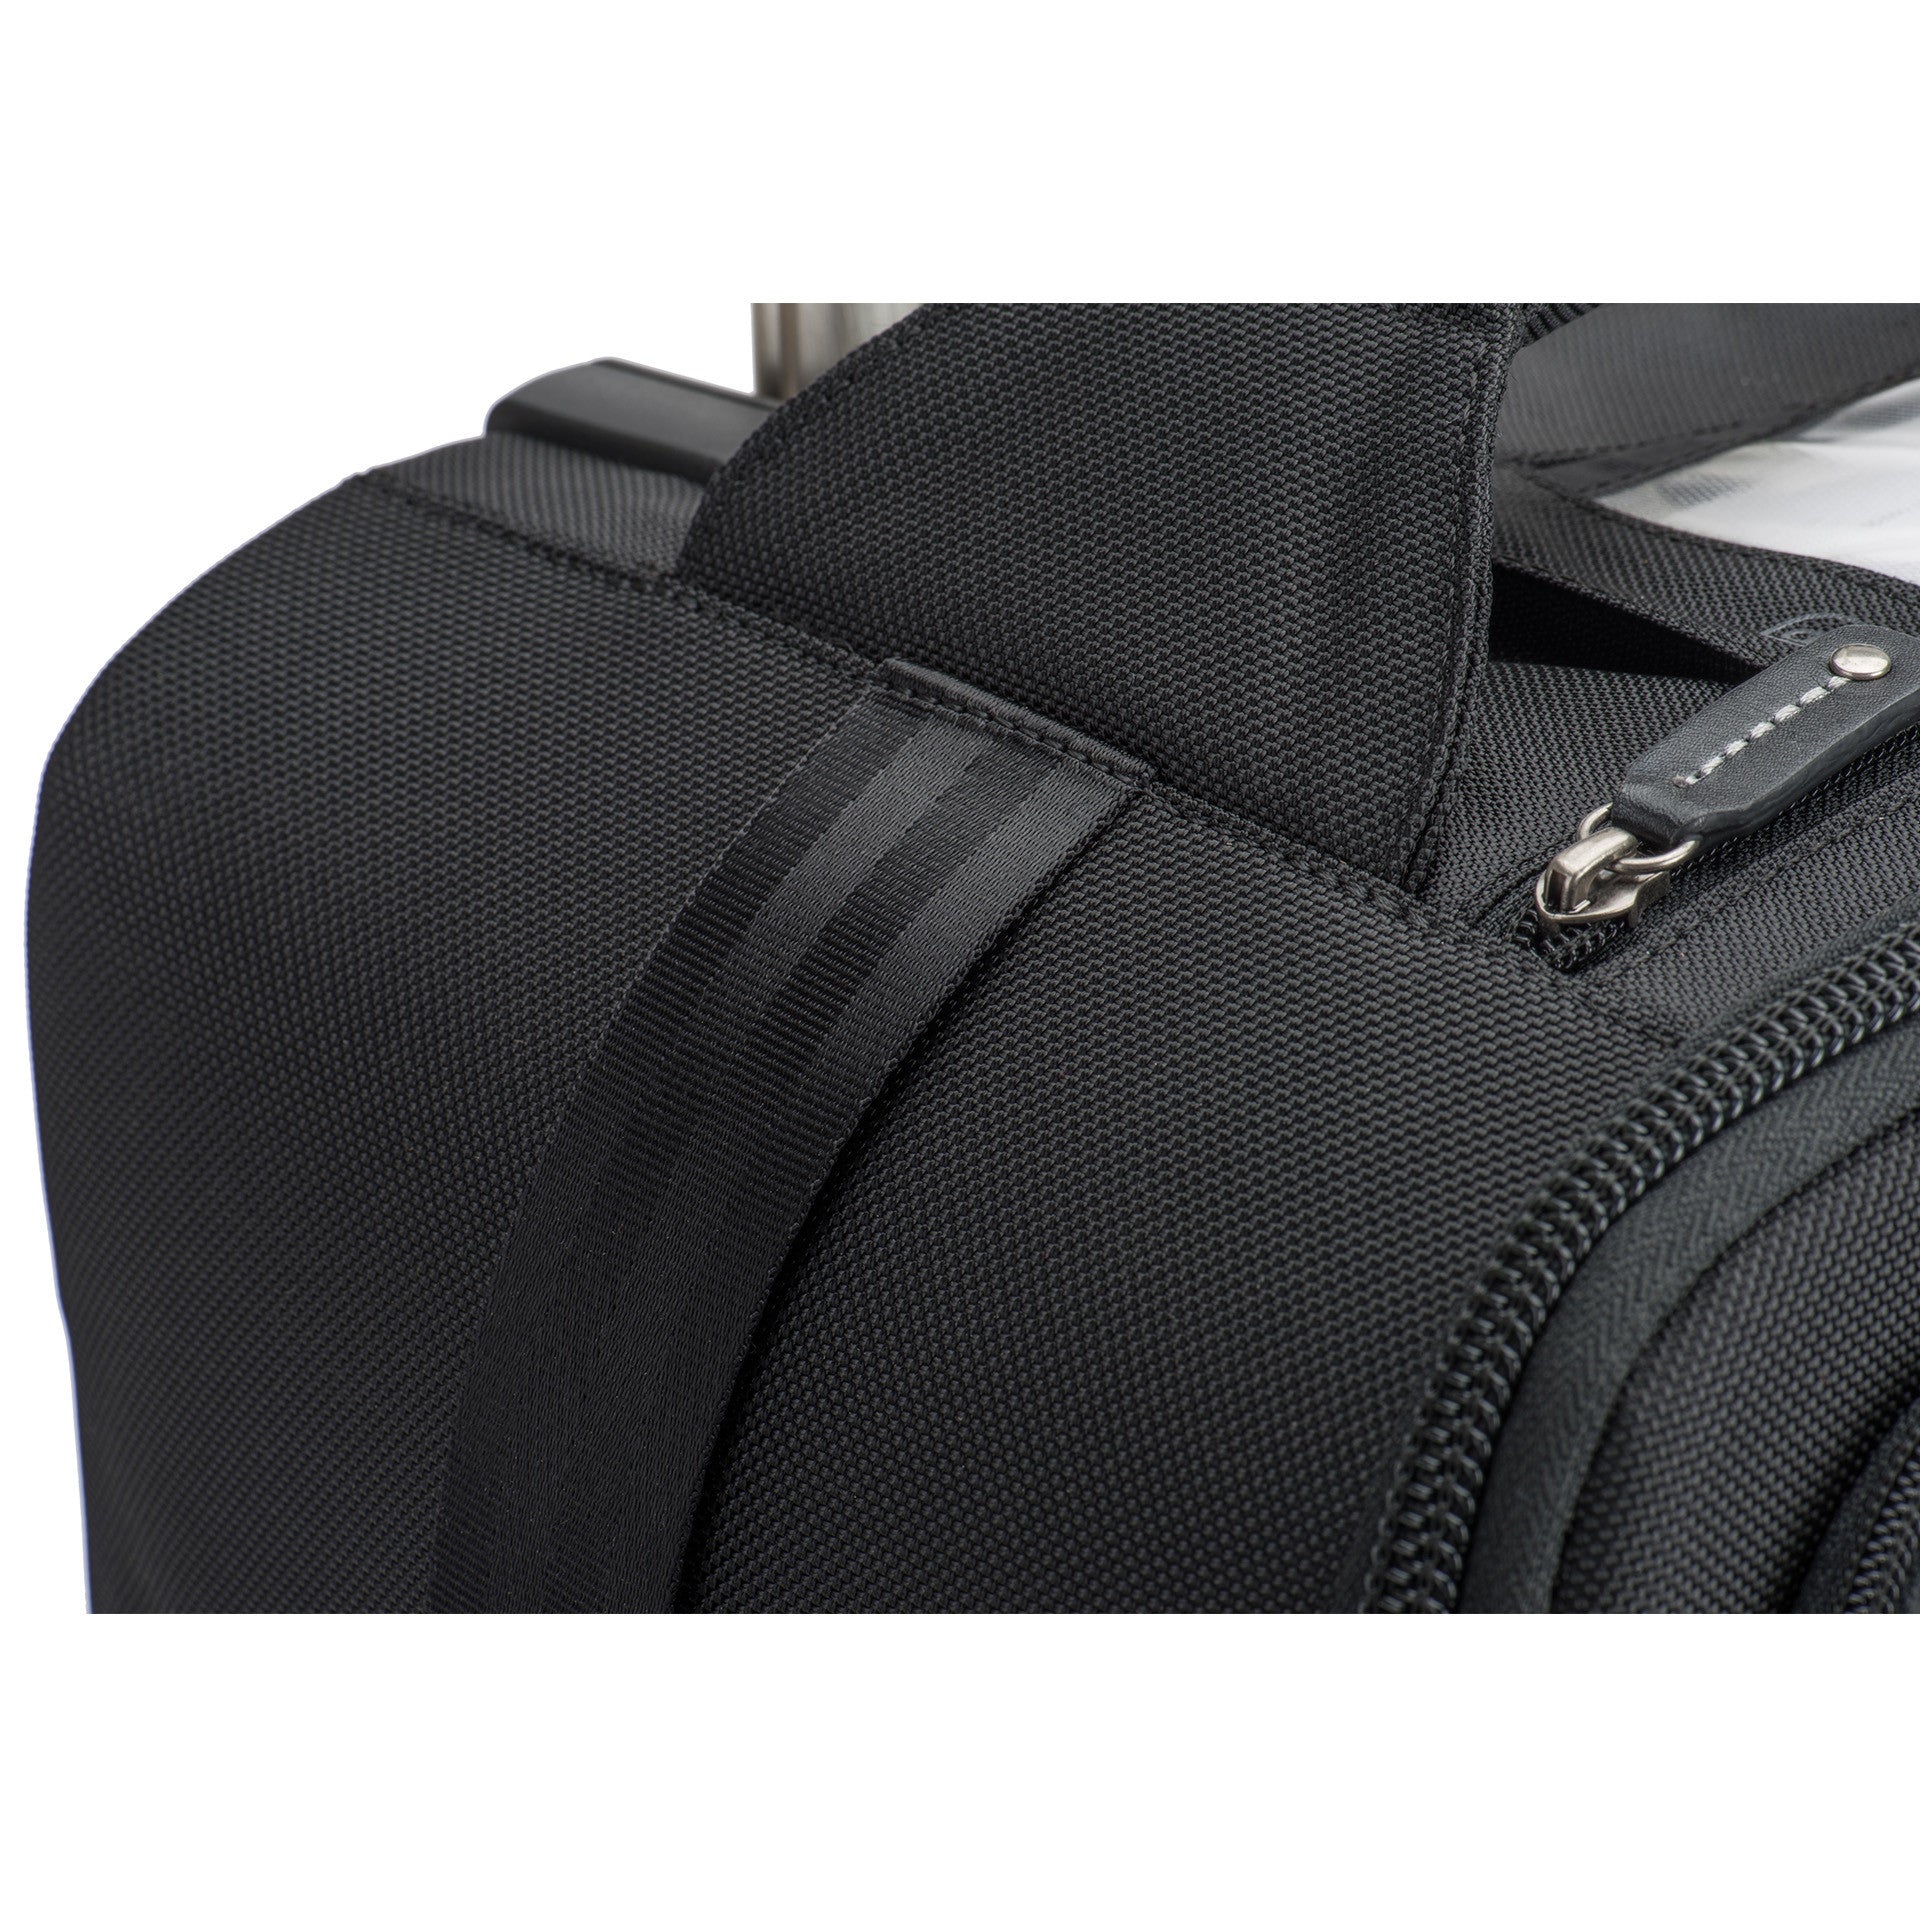 Think Tank Airport Security V3.0 Rolling Camera Bag, bags roller bags, Think Tank Photo - Pictureline  - 8